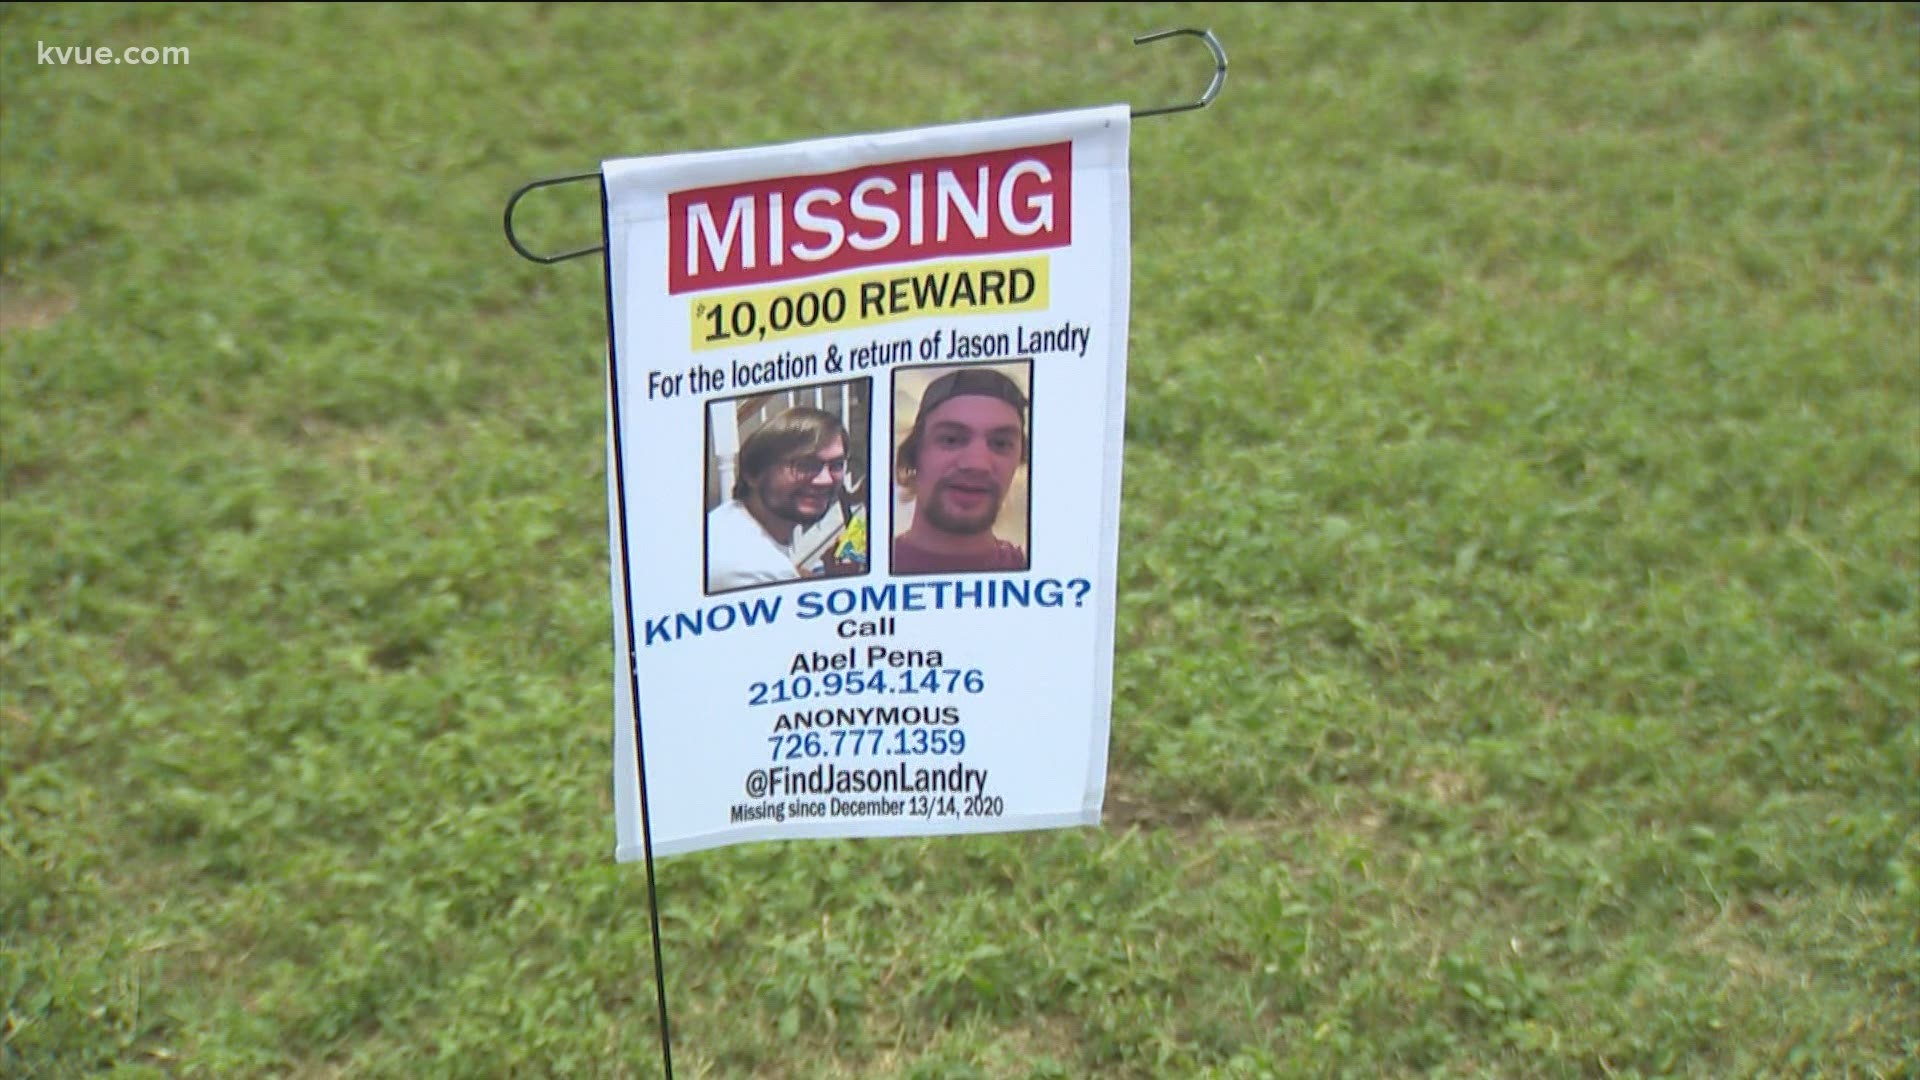 The family of a missing Texas State student is continuing the search for Jason Landry. His parents spread the word at the Luling Watermelon Thump event.